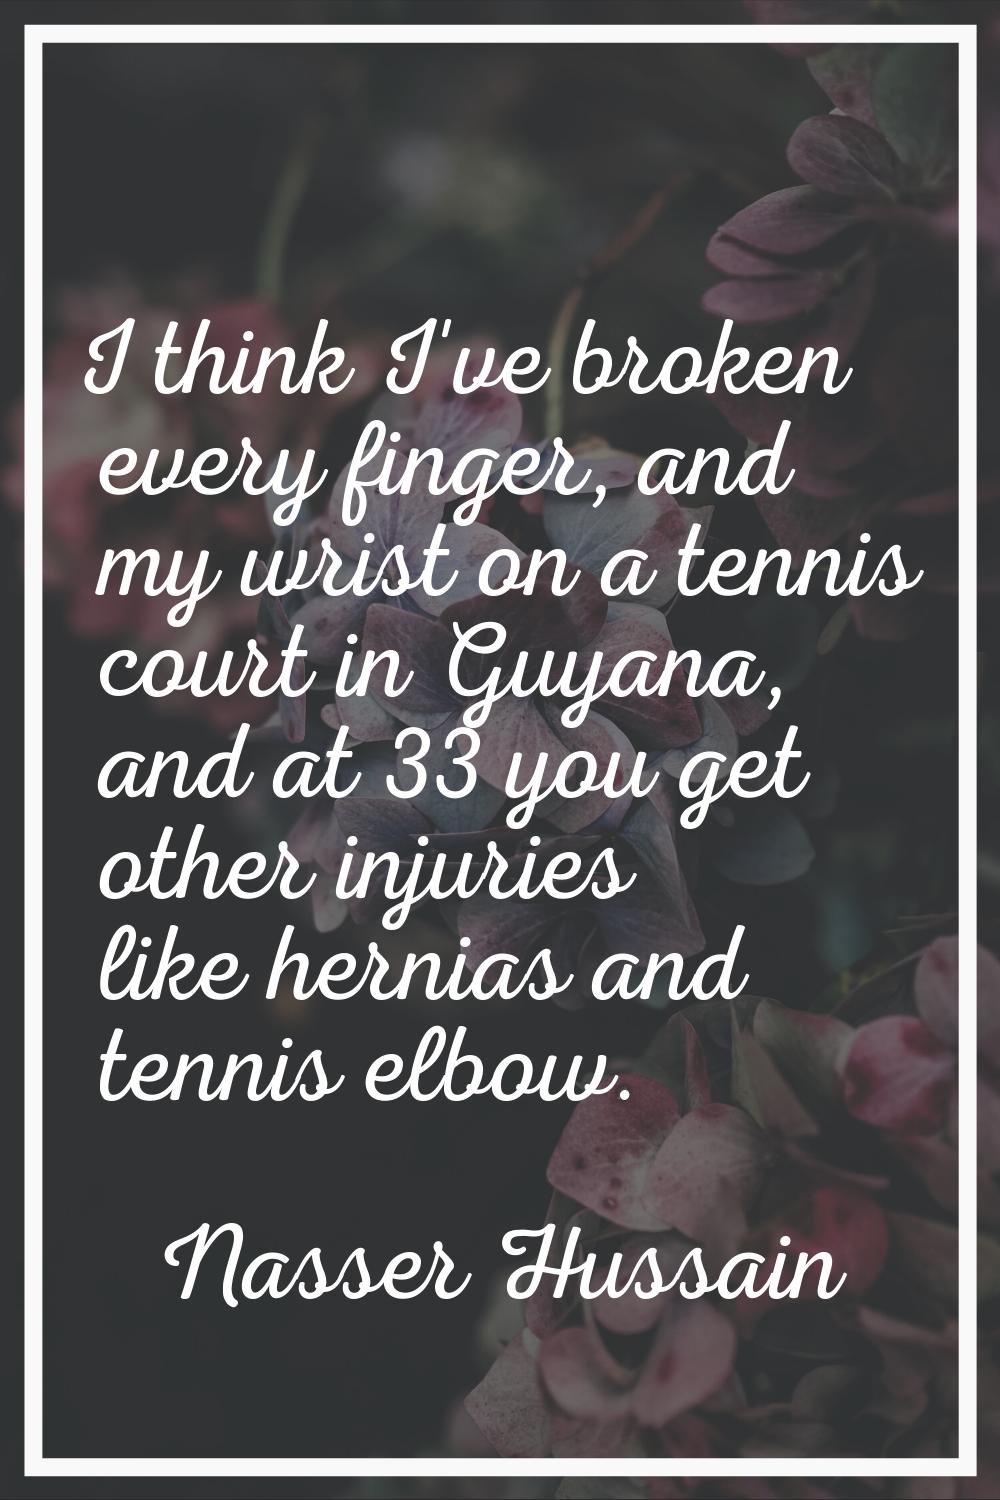 I think I've broken every finger, and my wrist on a tennis court in Guyana, and at 33 you get other